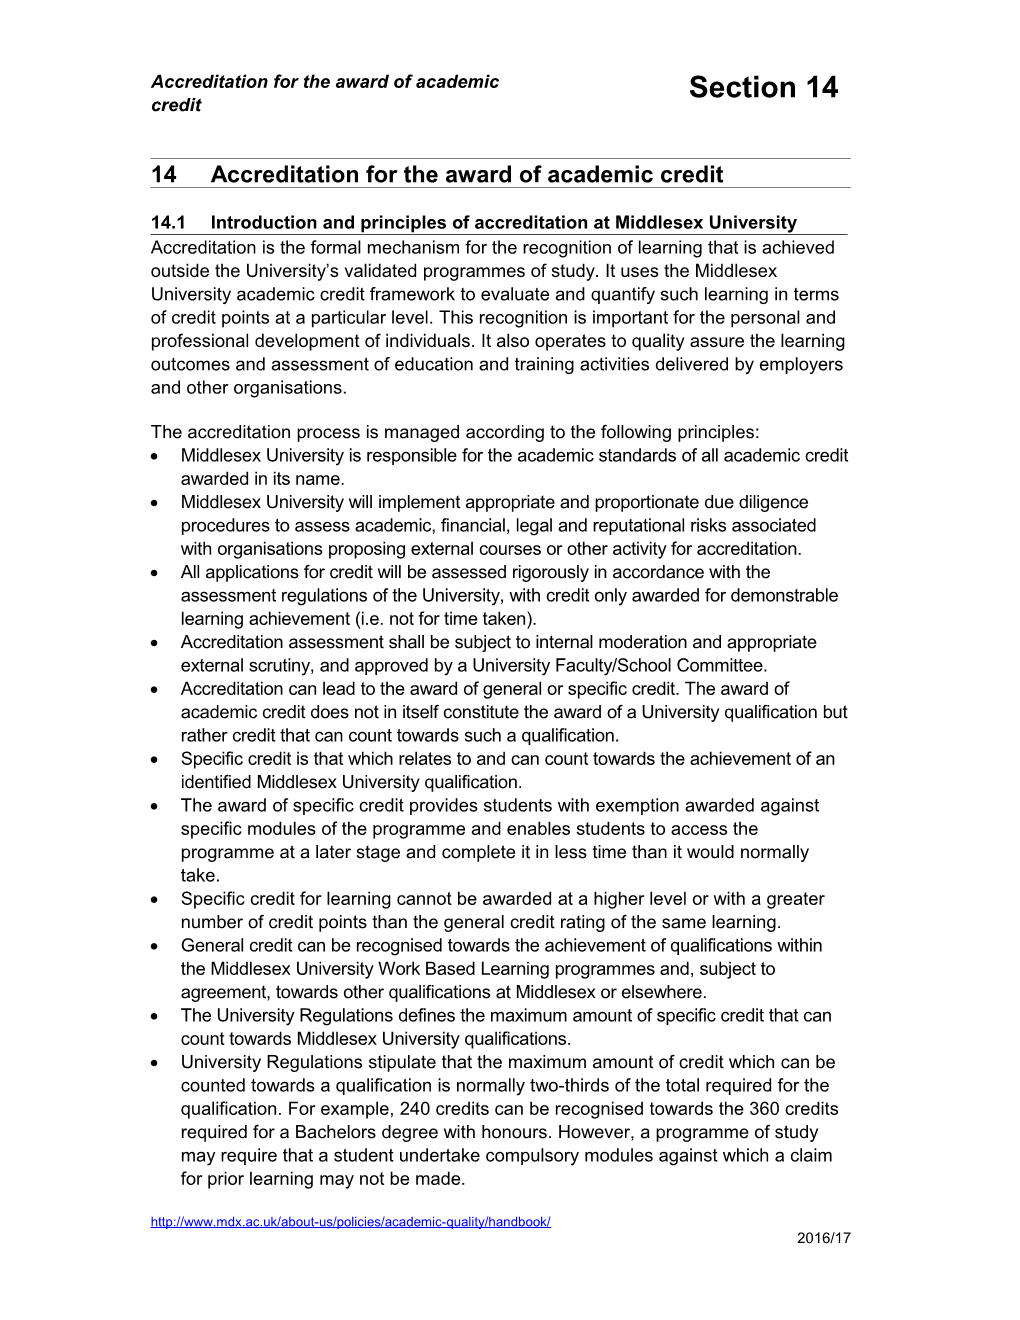 14Accreditation for the Award of Academic Credit